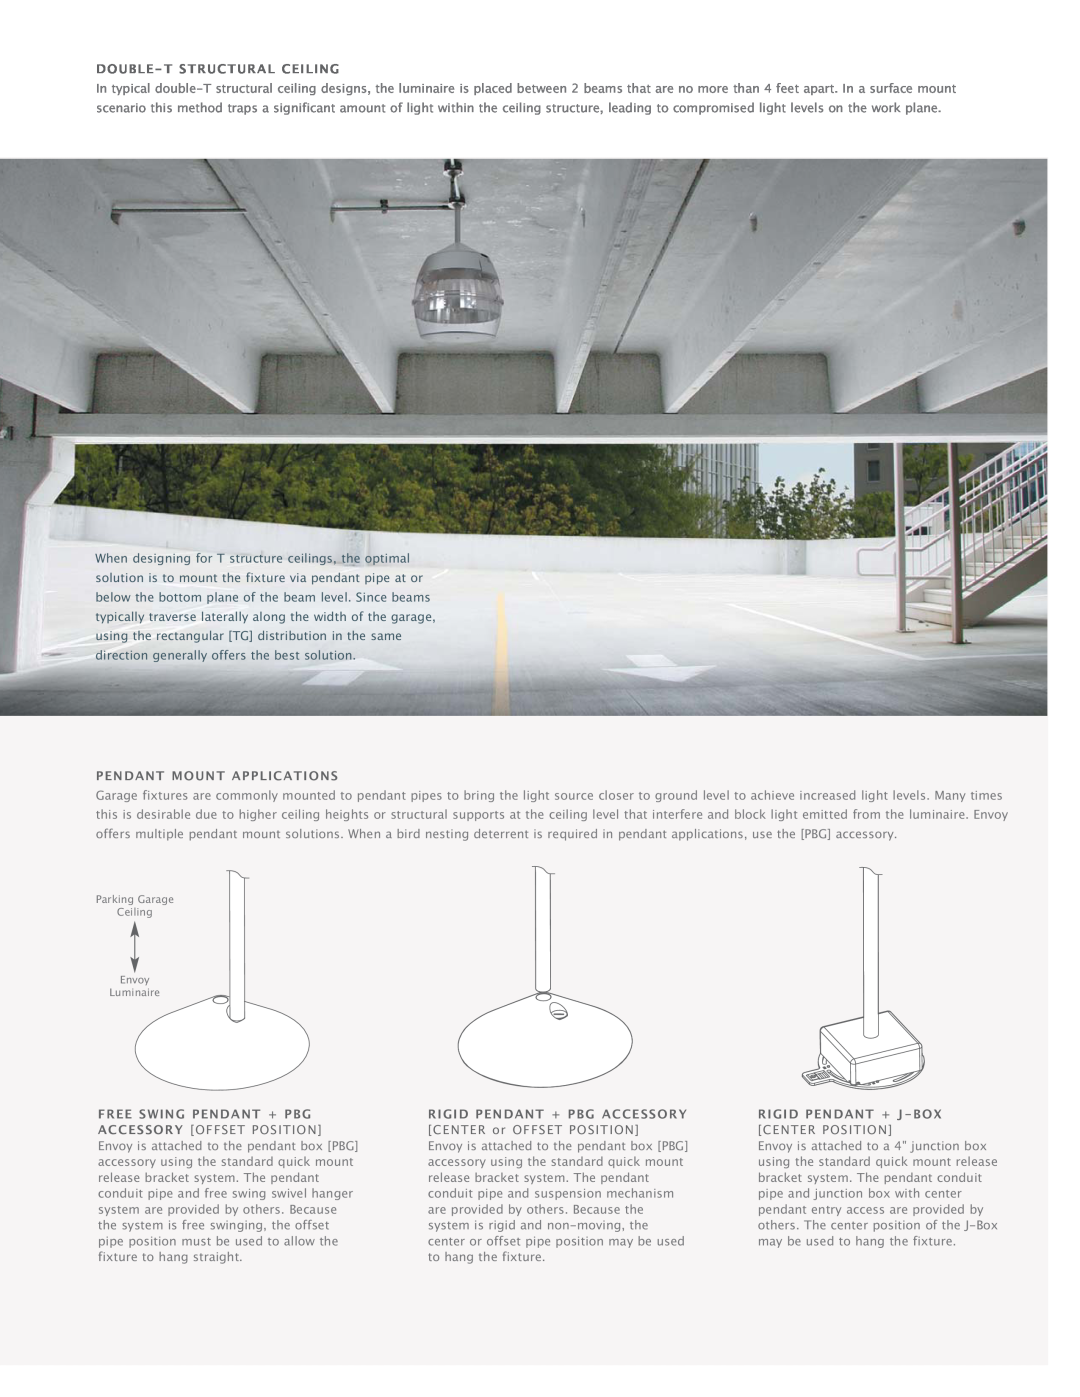 Cooper Lighting Envoy Double-T Structural Ceiling, When designing for T structure ceilings, the optimal, Center Position 